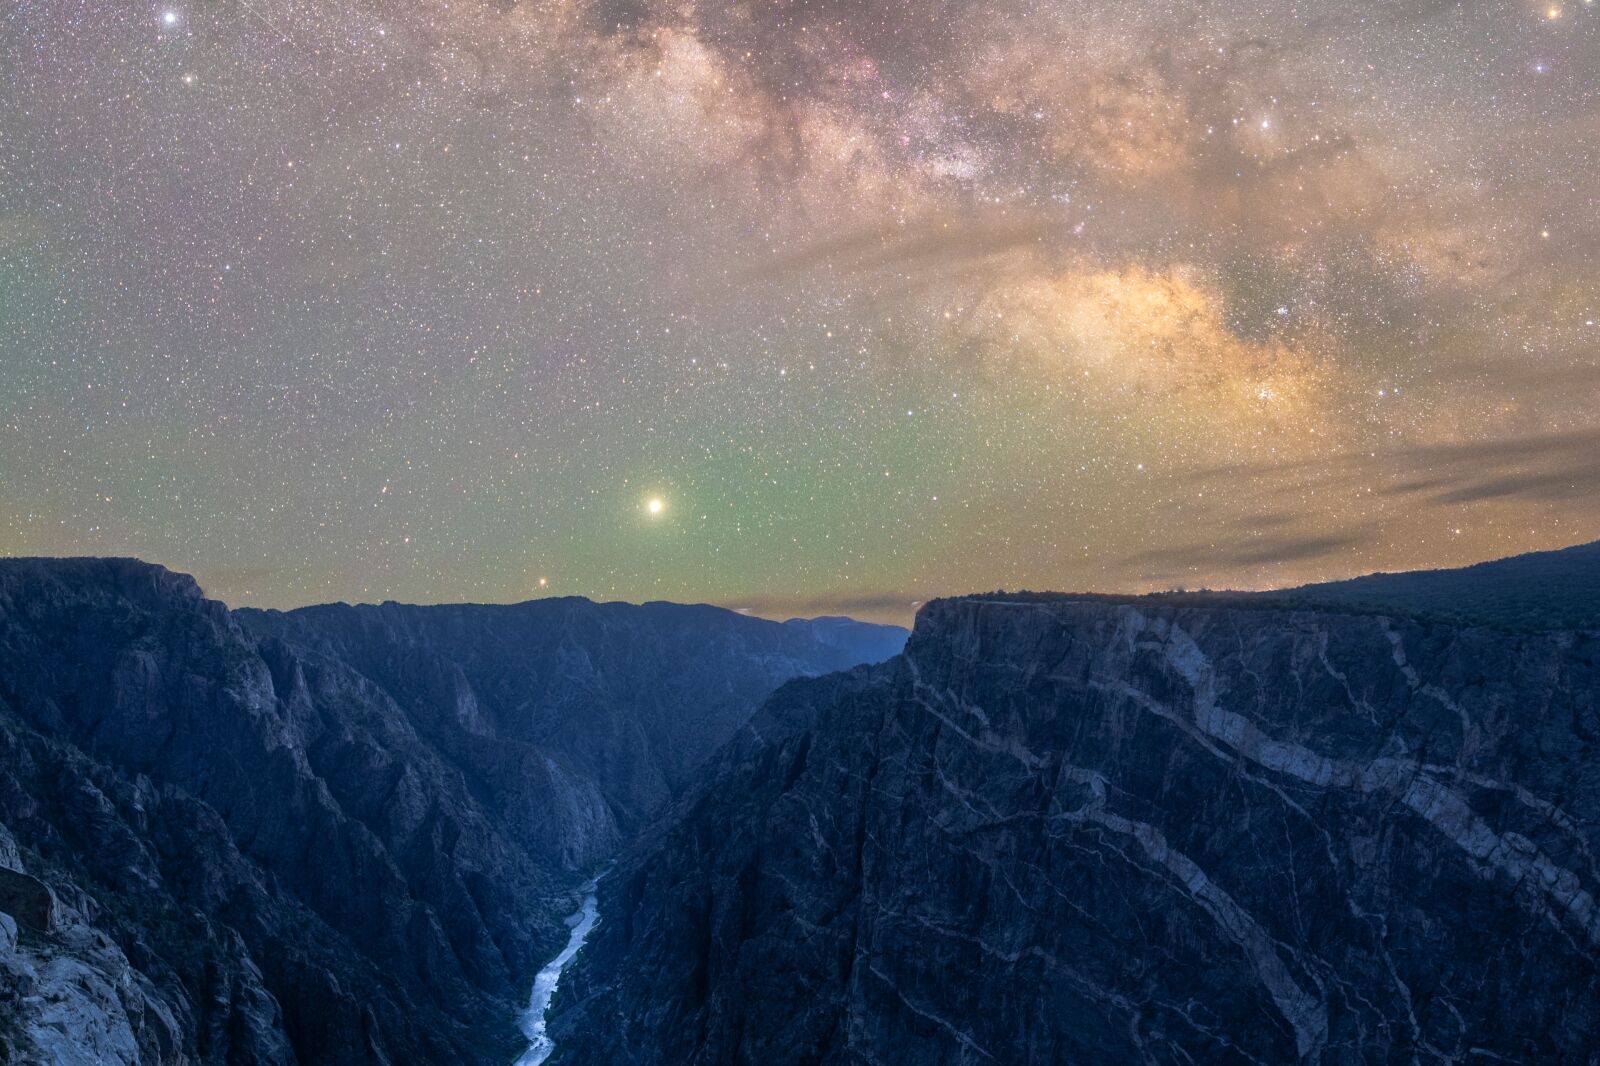 Milky Way exposure over Black Canyon of the Gunnison National Park and dark sky location in the US 